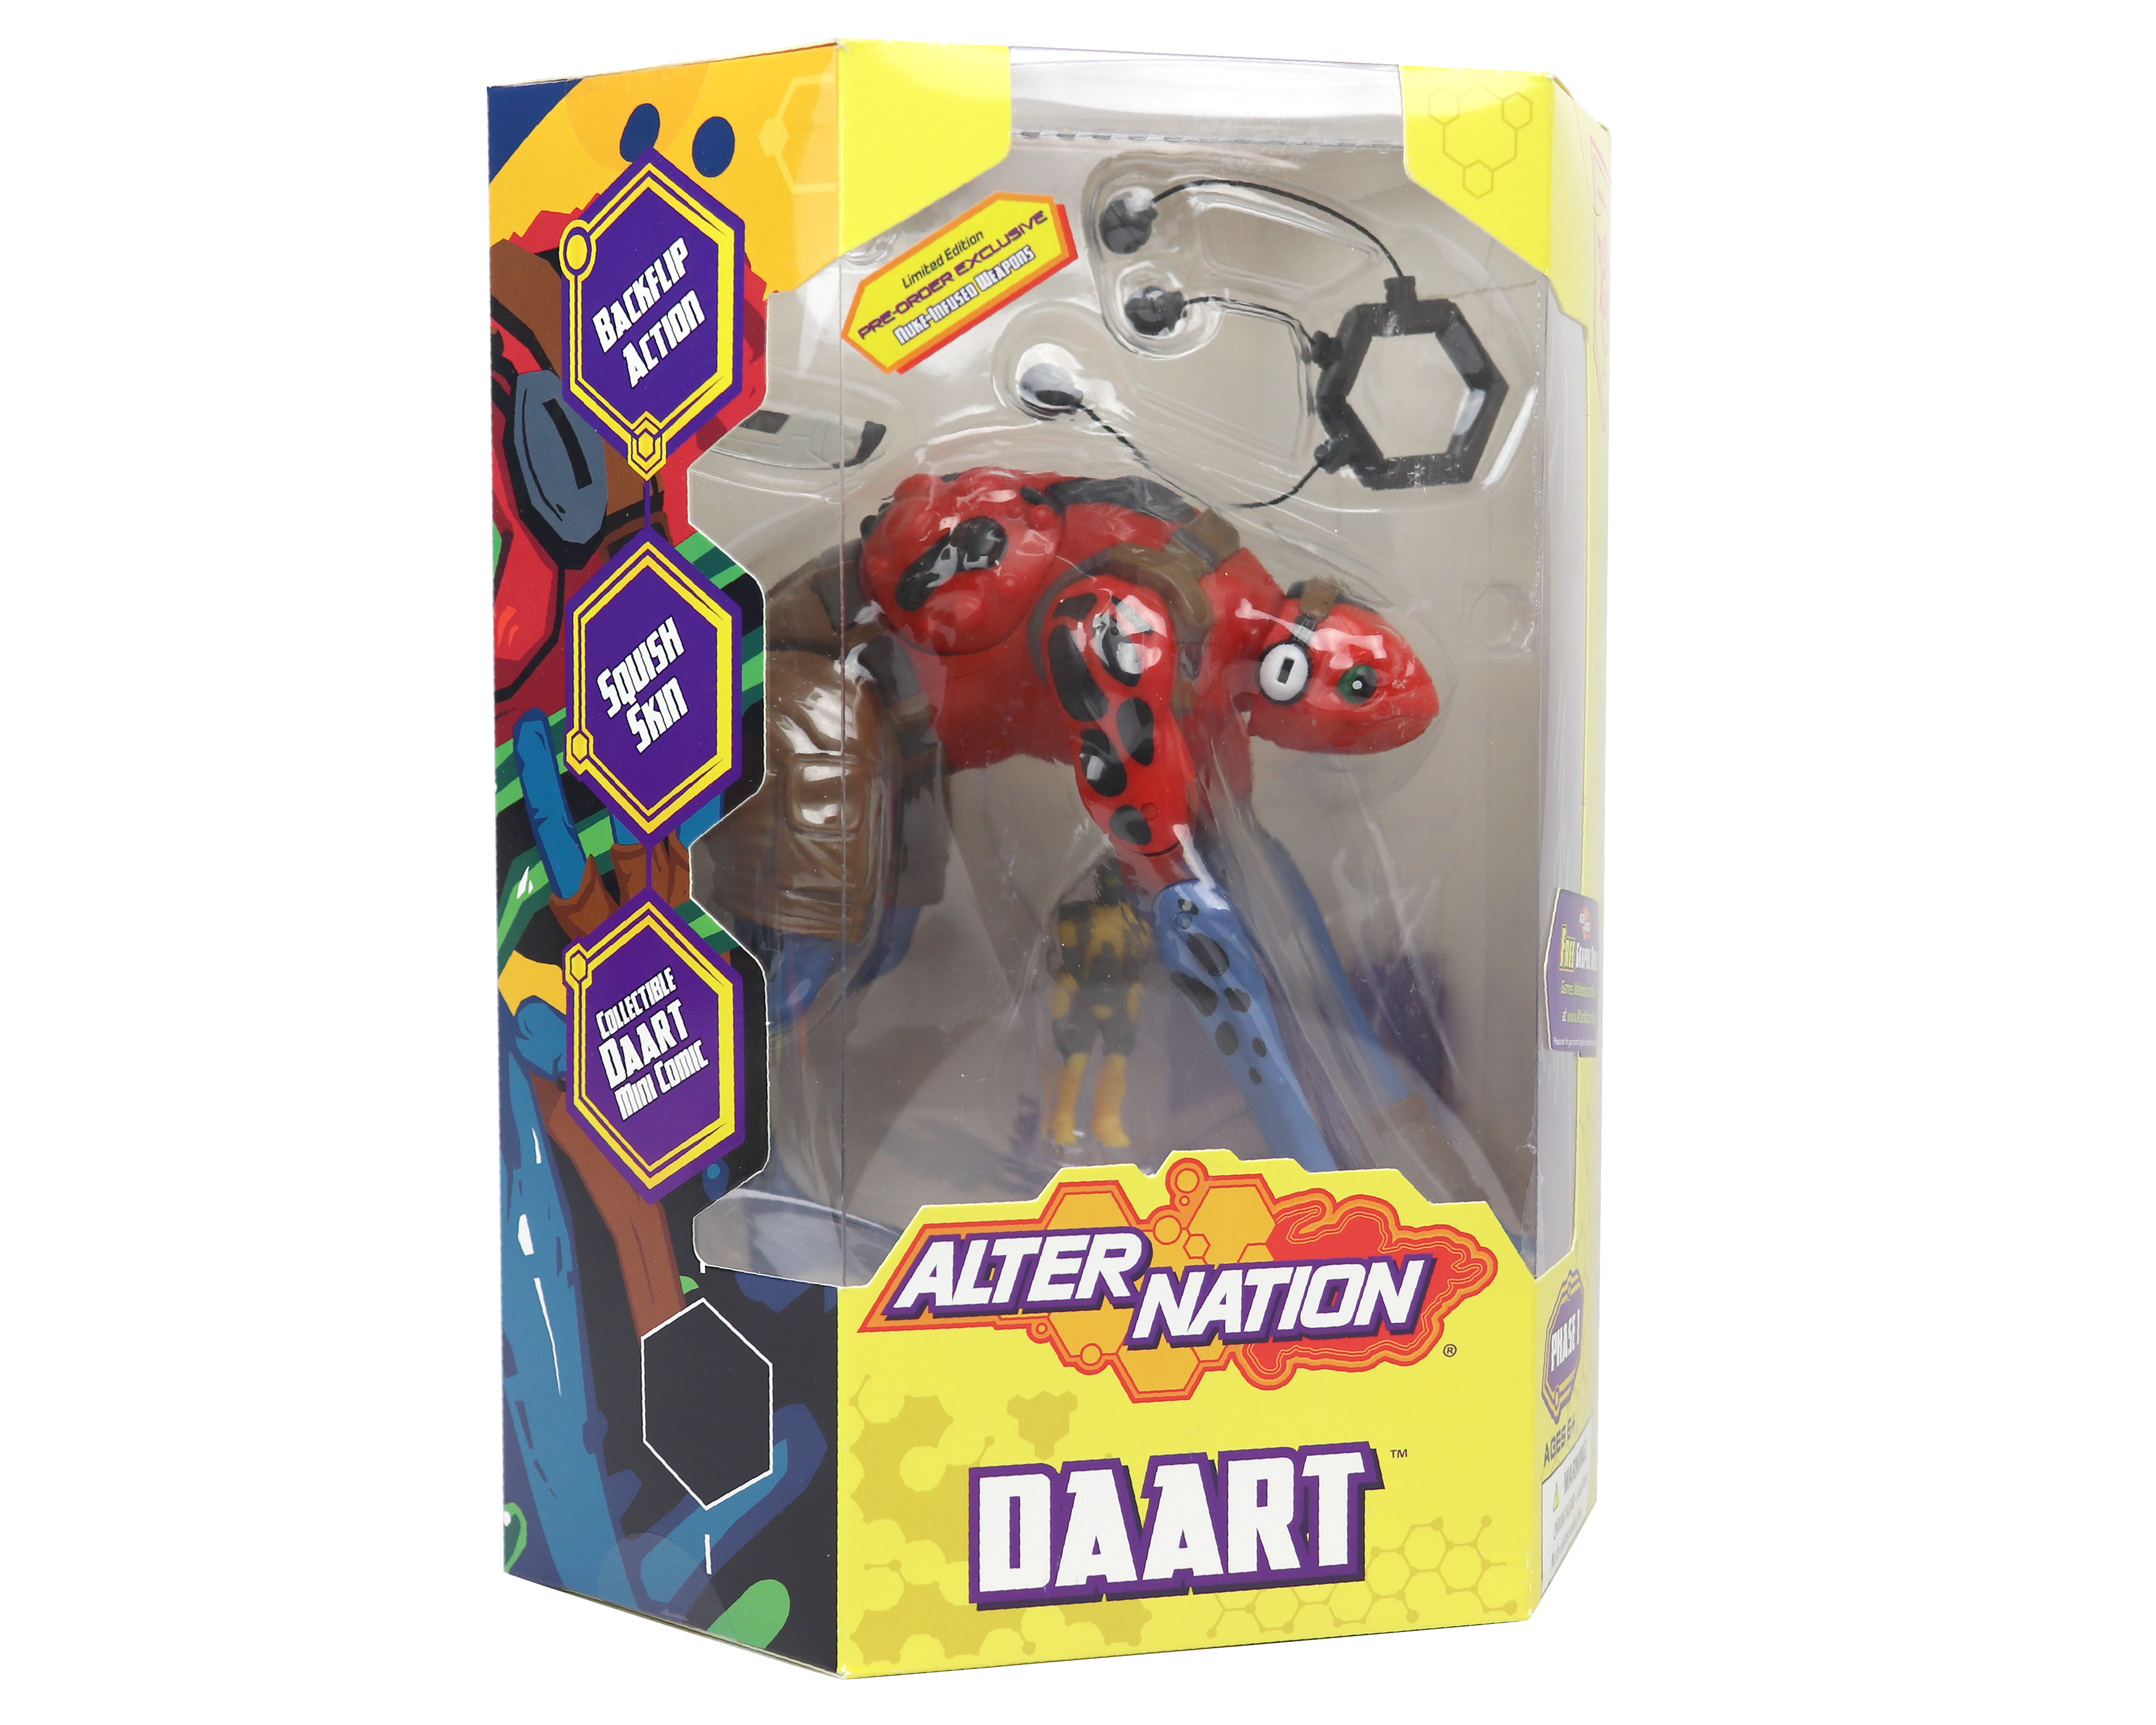 Alter Nation - Daart - Limited Edition Action Figure with Bonus Comic